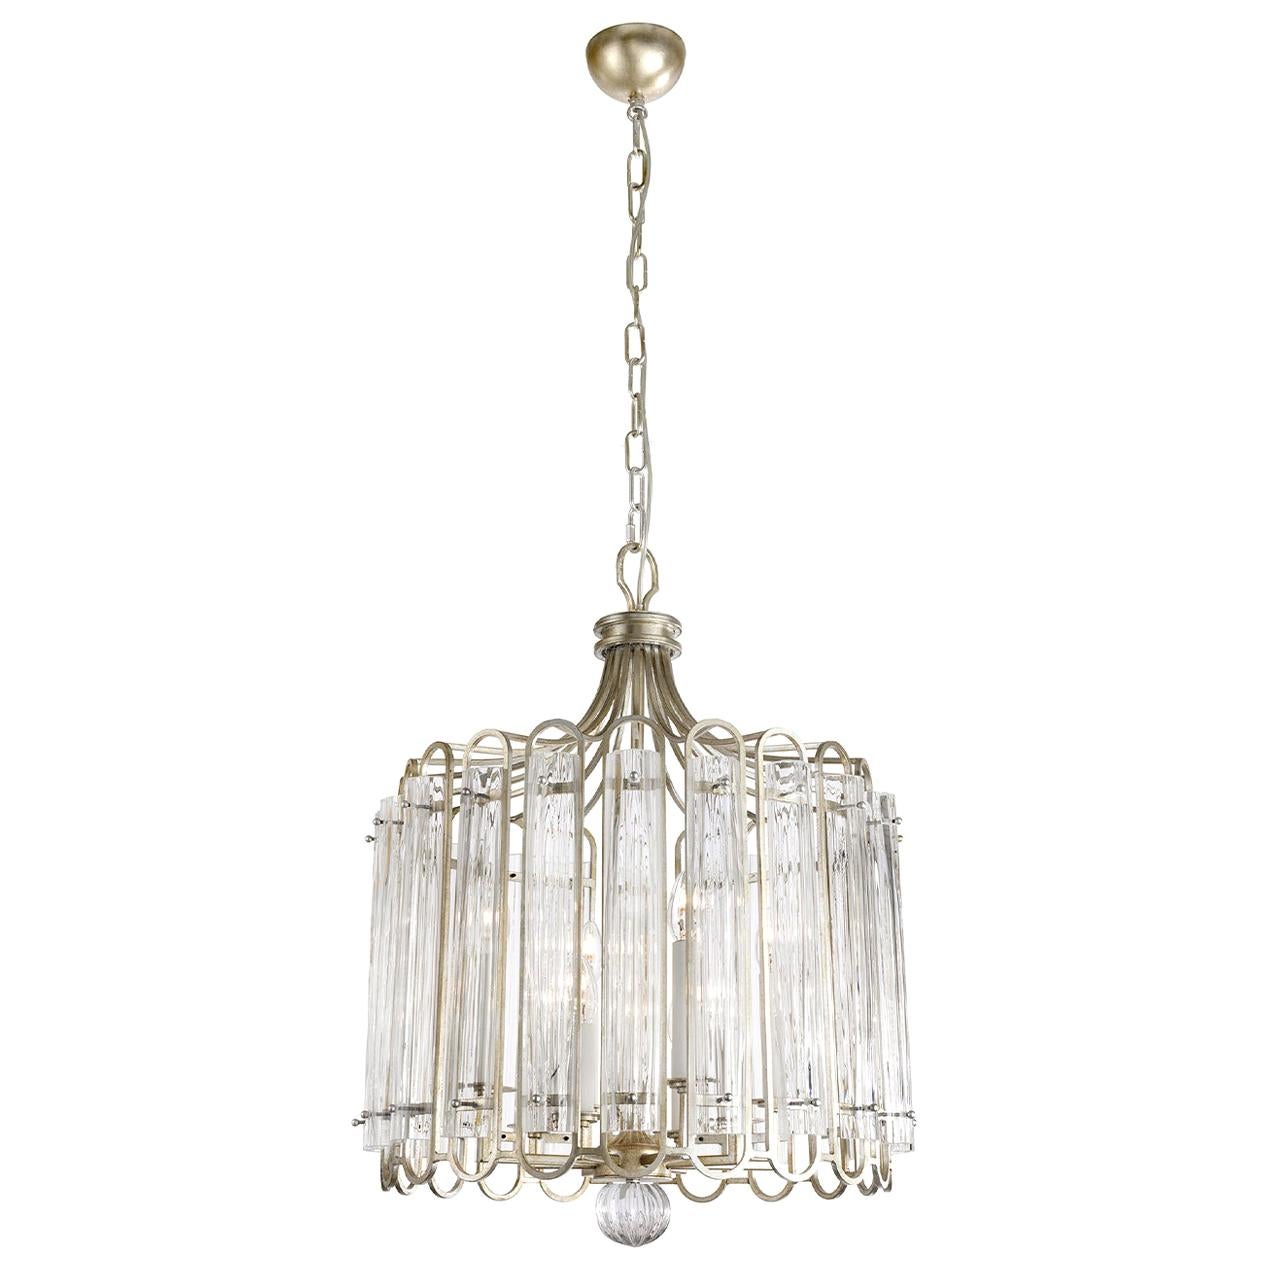 20716 Chandelier For Sale